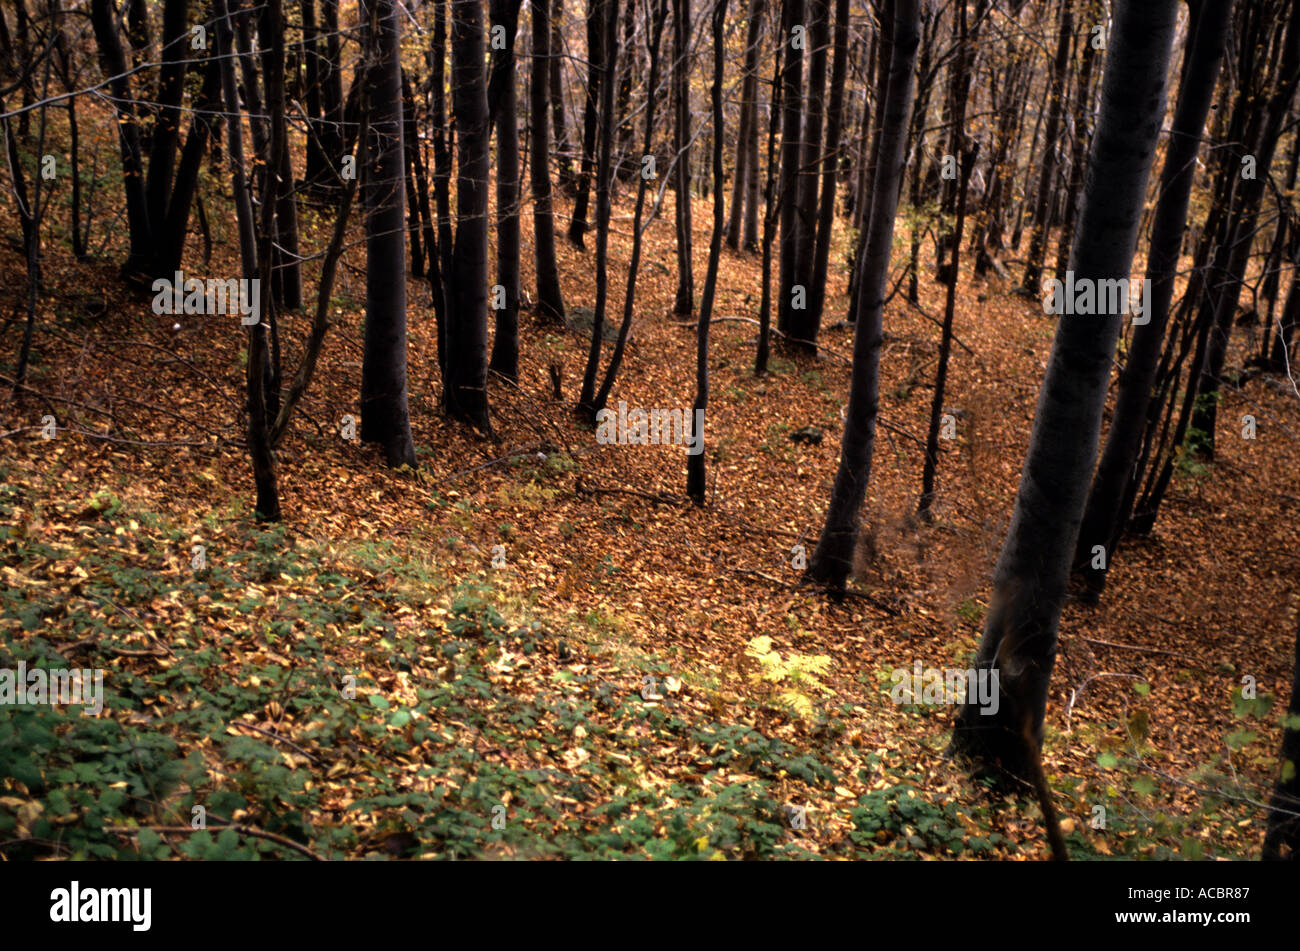 A WOODLAND SCENE IN NORTHERN ITALY Stock Photo